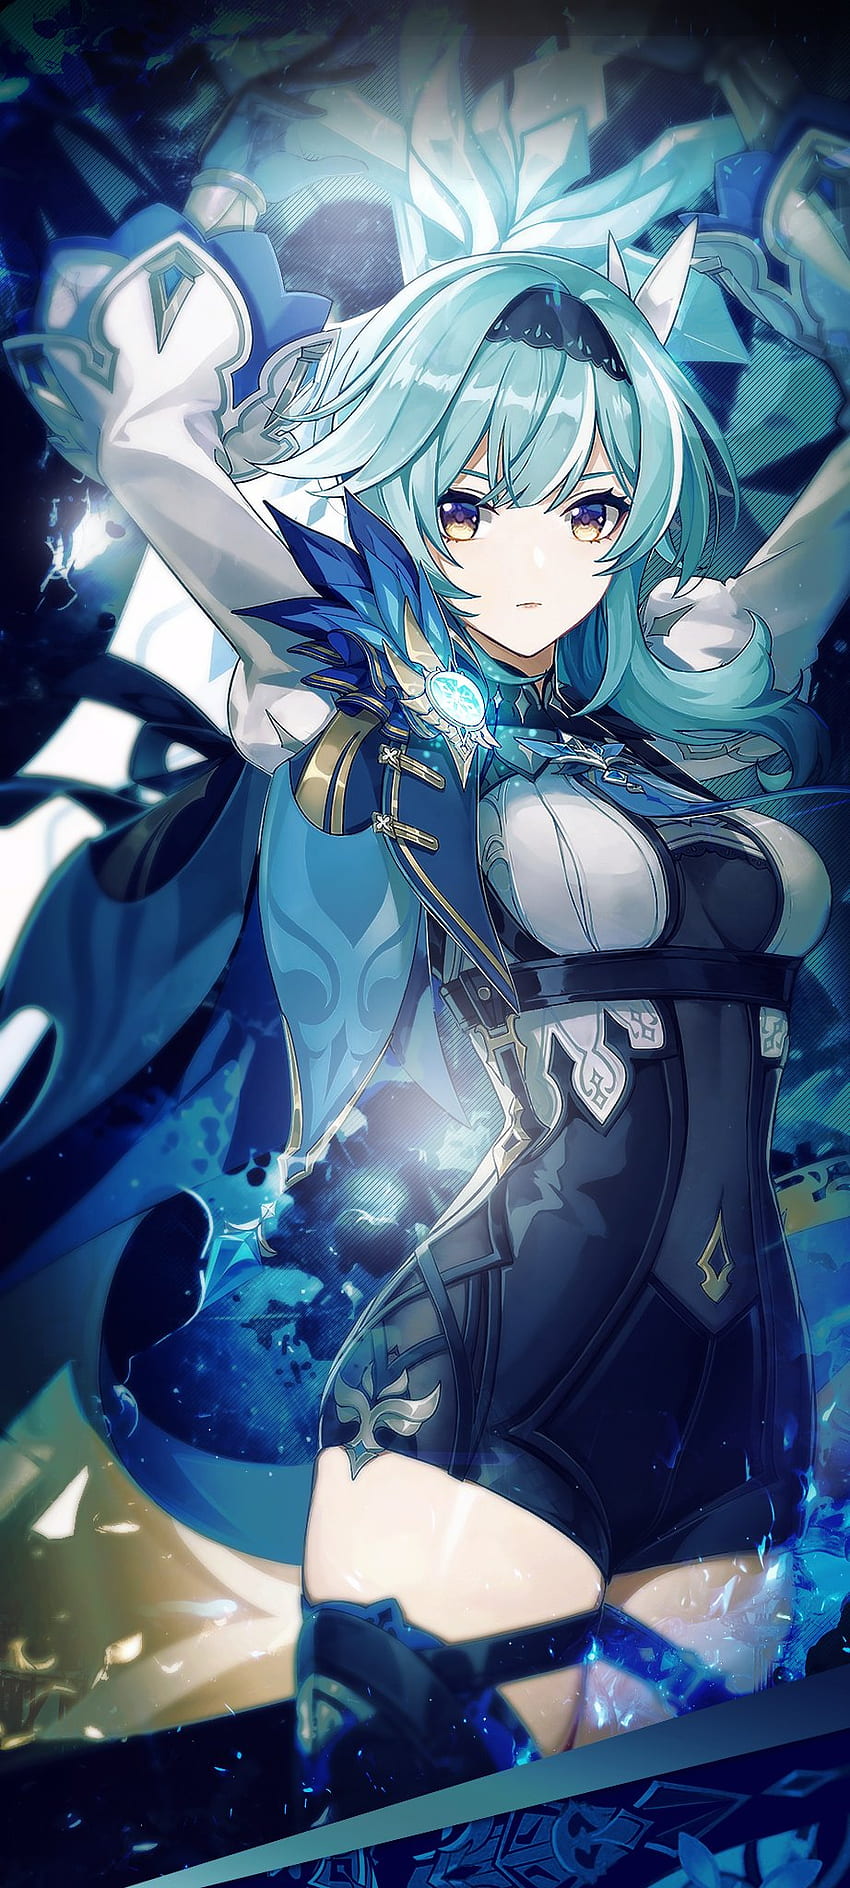 NightTIDE - Eula Genshin Impact Mobile and ; Good luck on your rolls for our tall icy lady, and may vengeance be yours! ❄️For the rest of the playable HD phone wallpaper